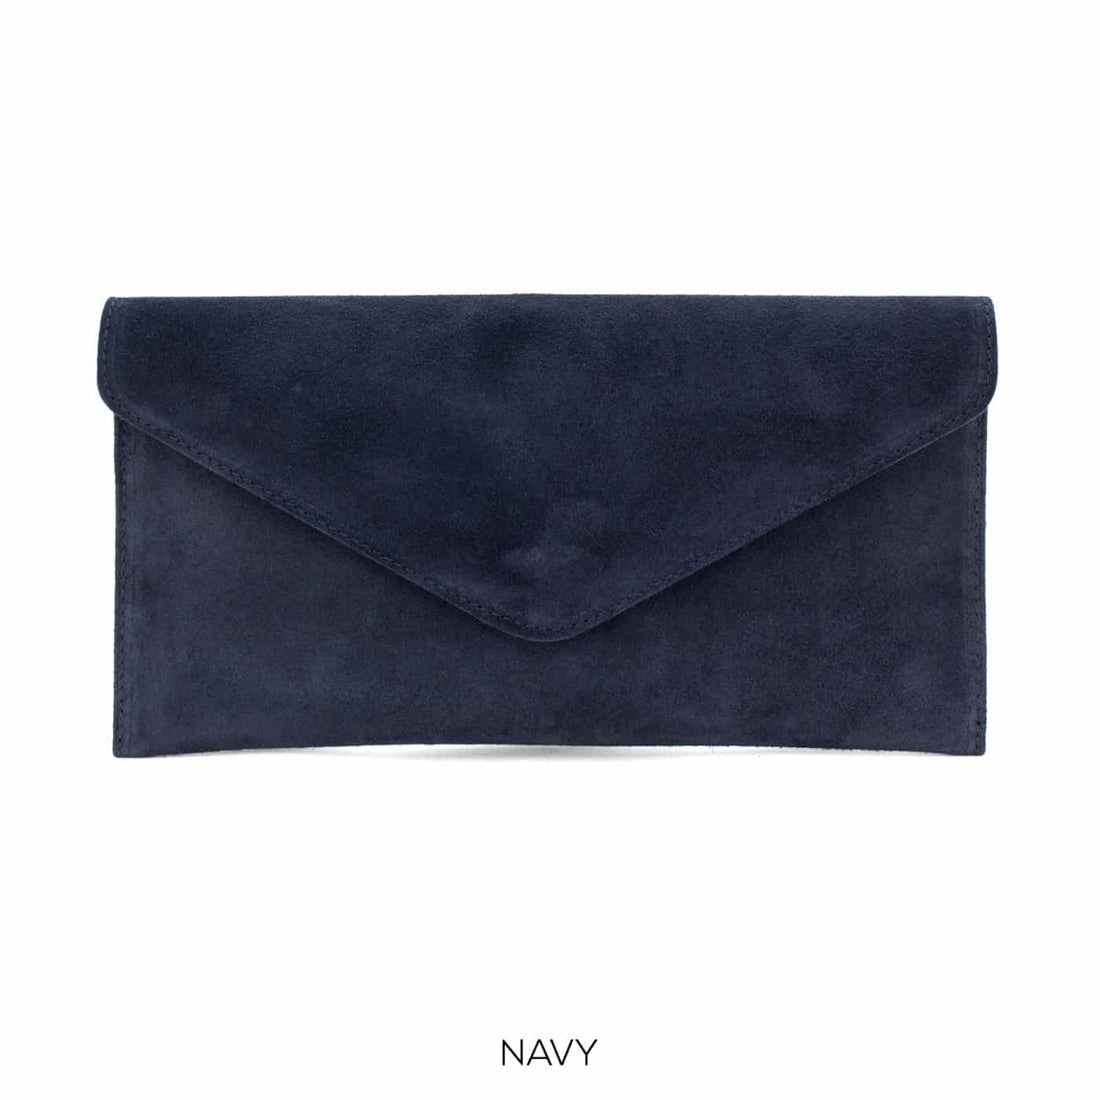 Envelope Clutch Suede Leather